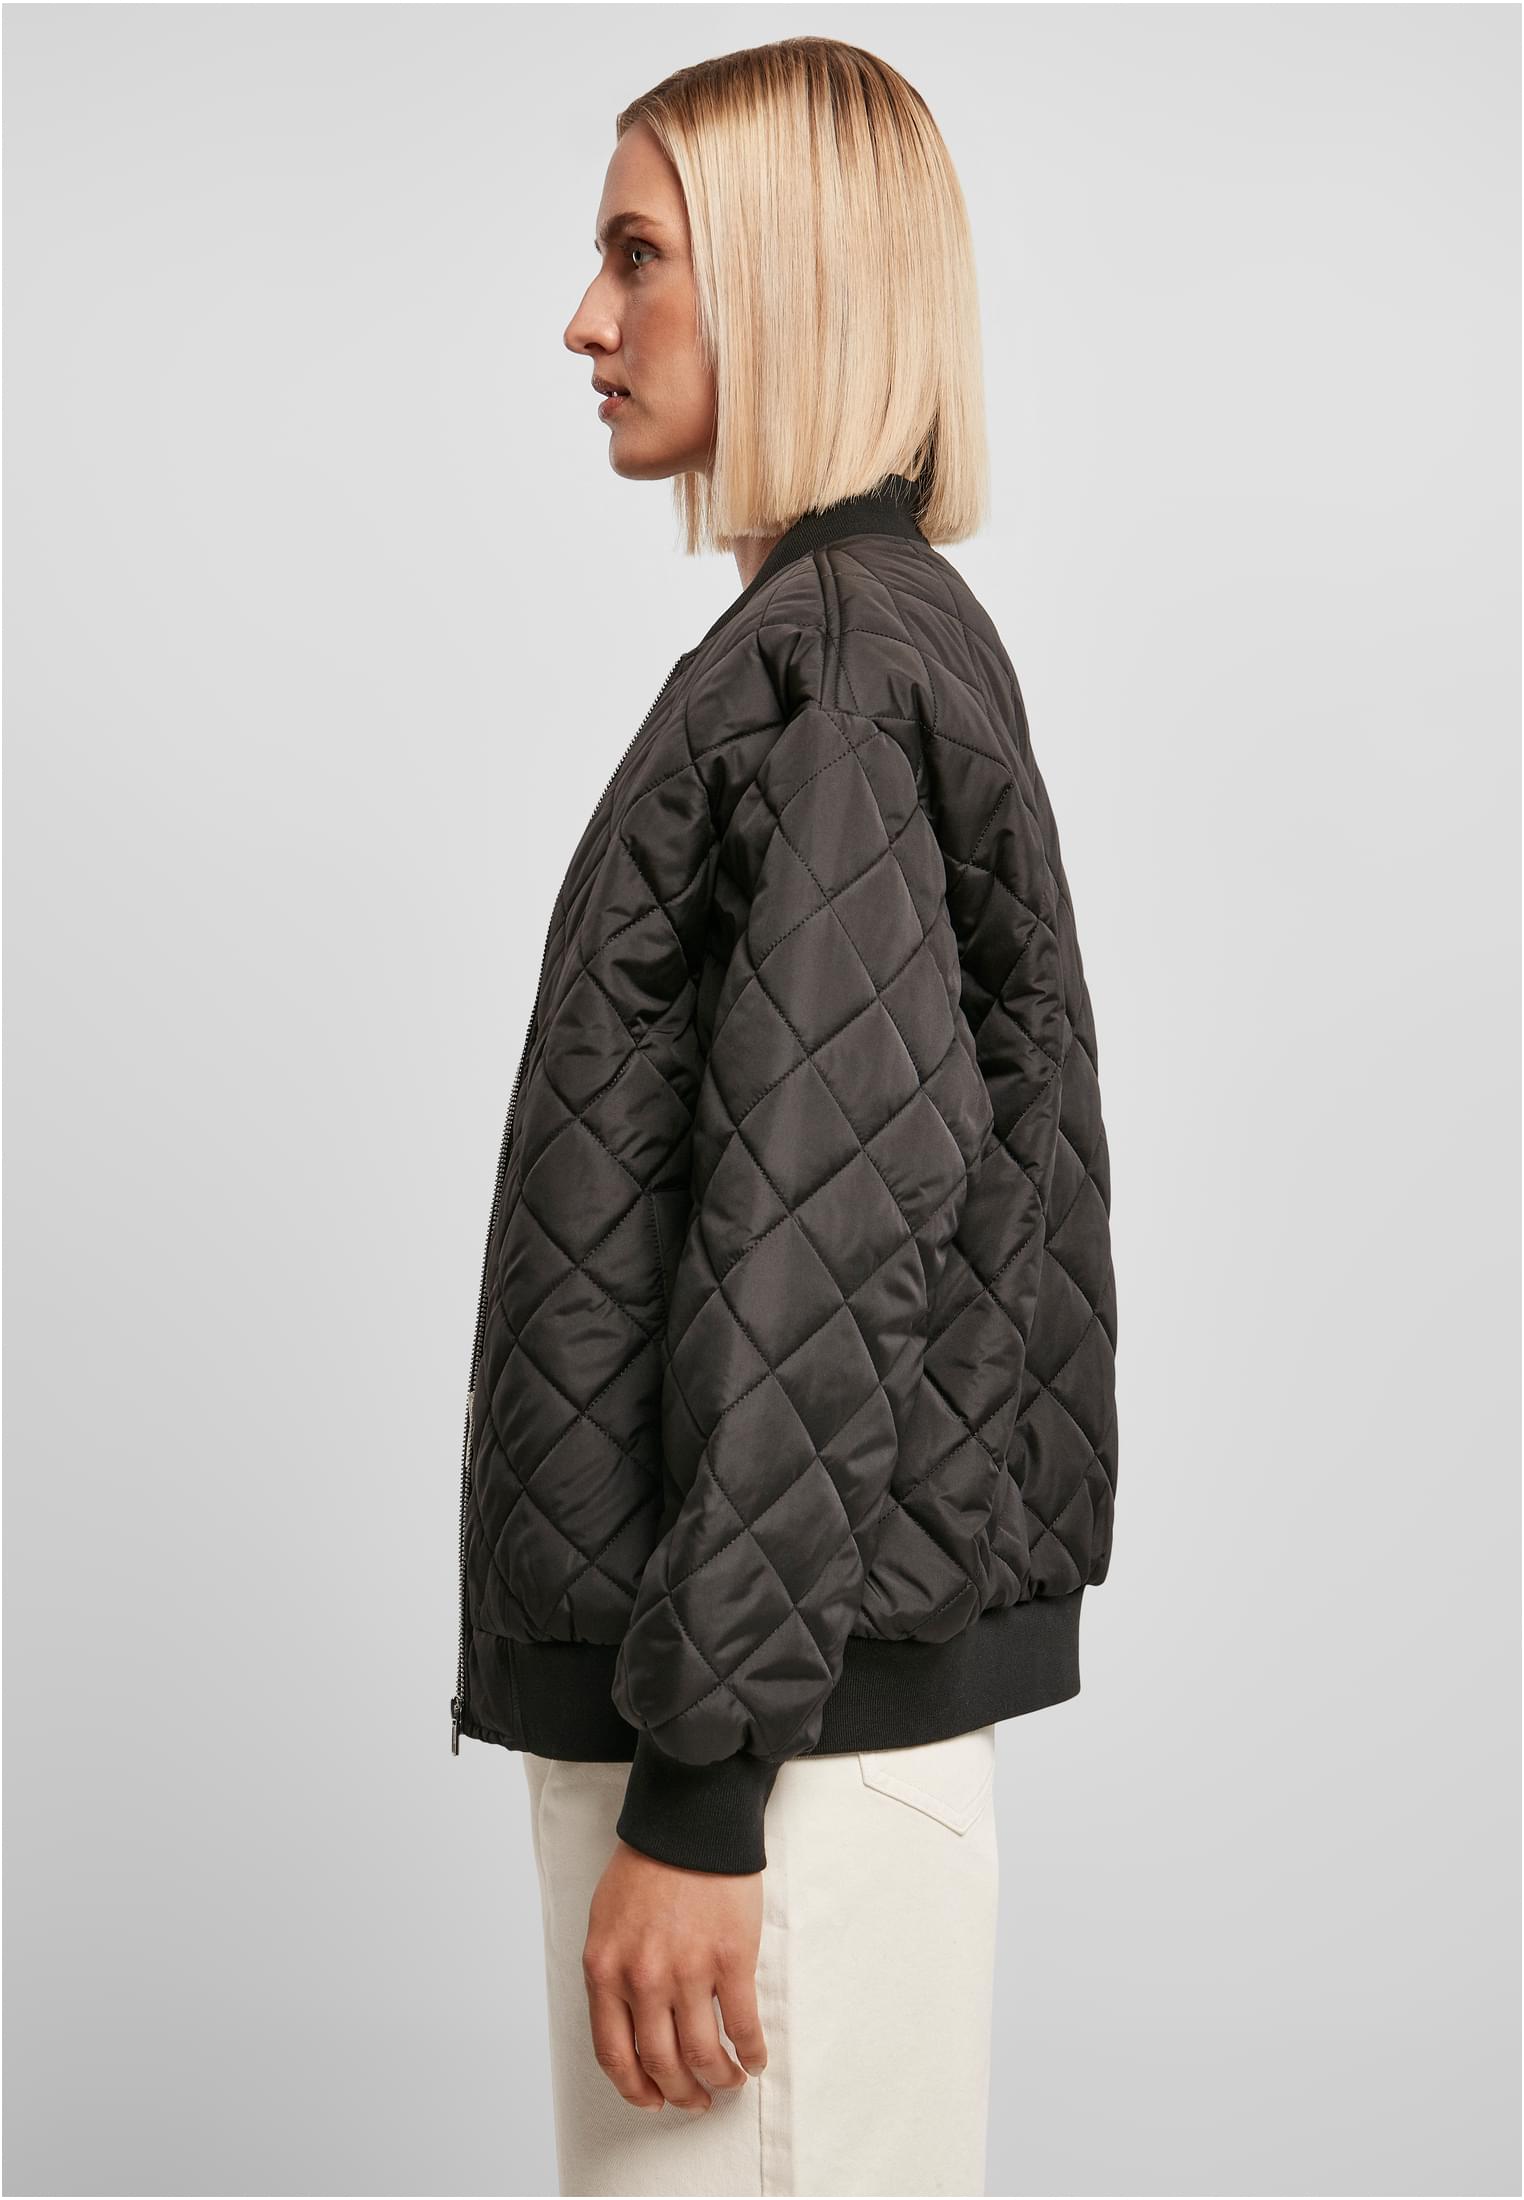 Frauen Ladies Oversized Diamond Quilted Bomber Jacket in Farbe black